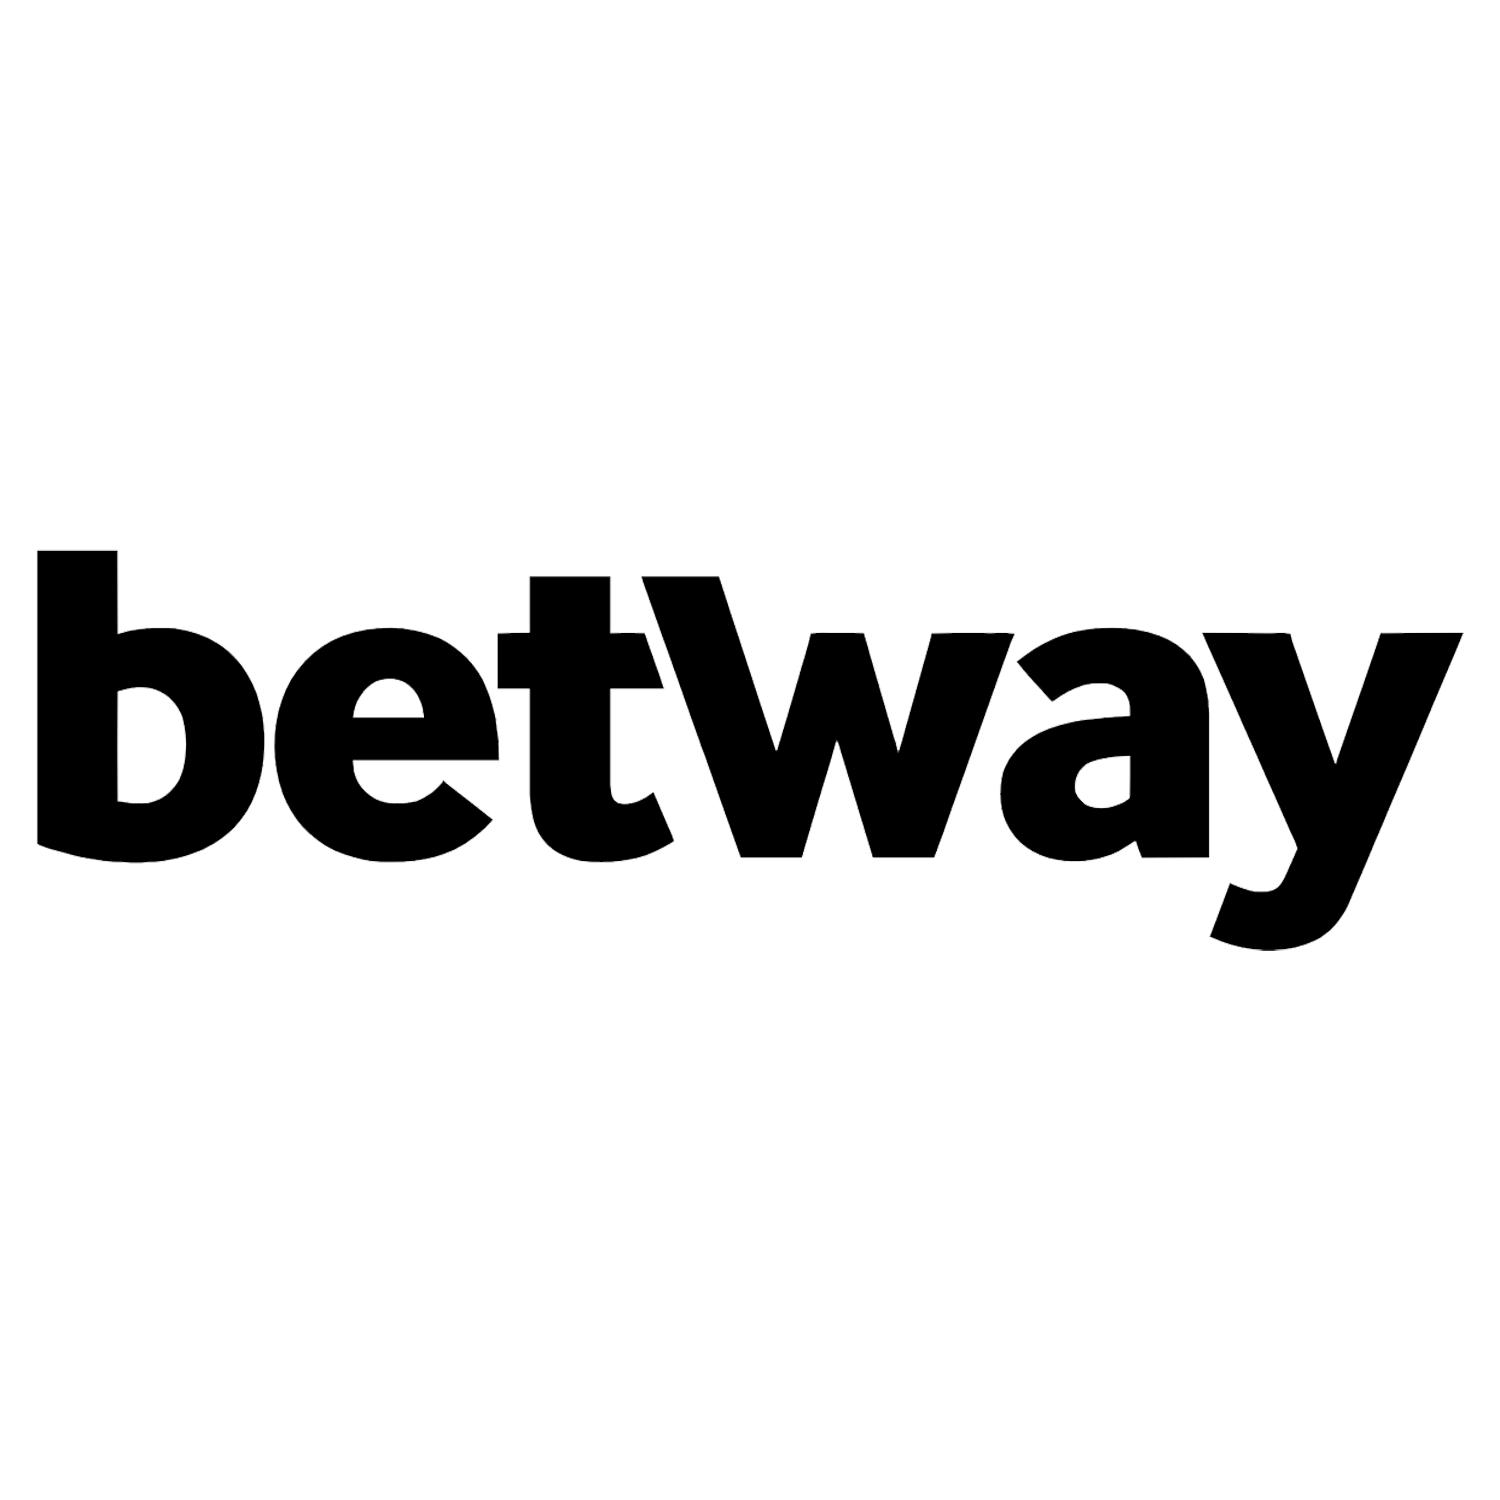 Many cricket fans prefer Betway for placing bets.